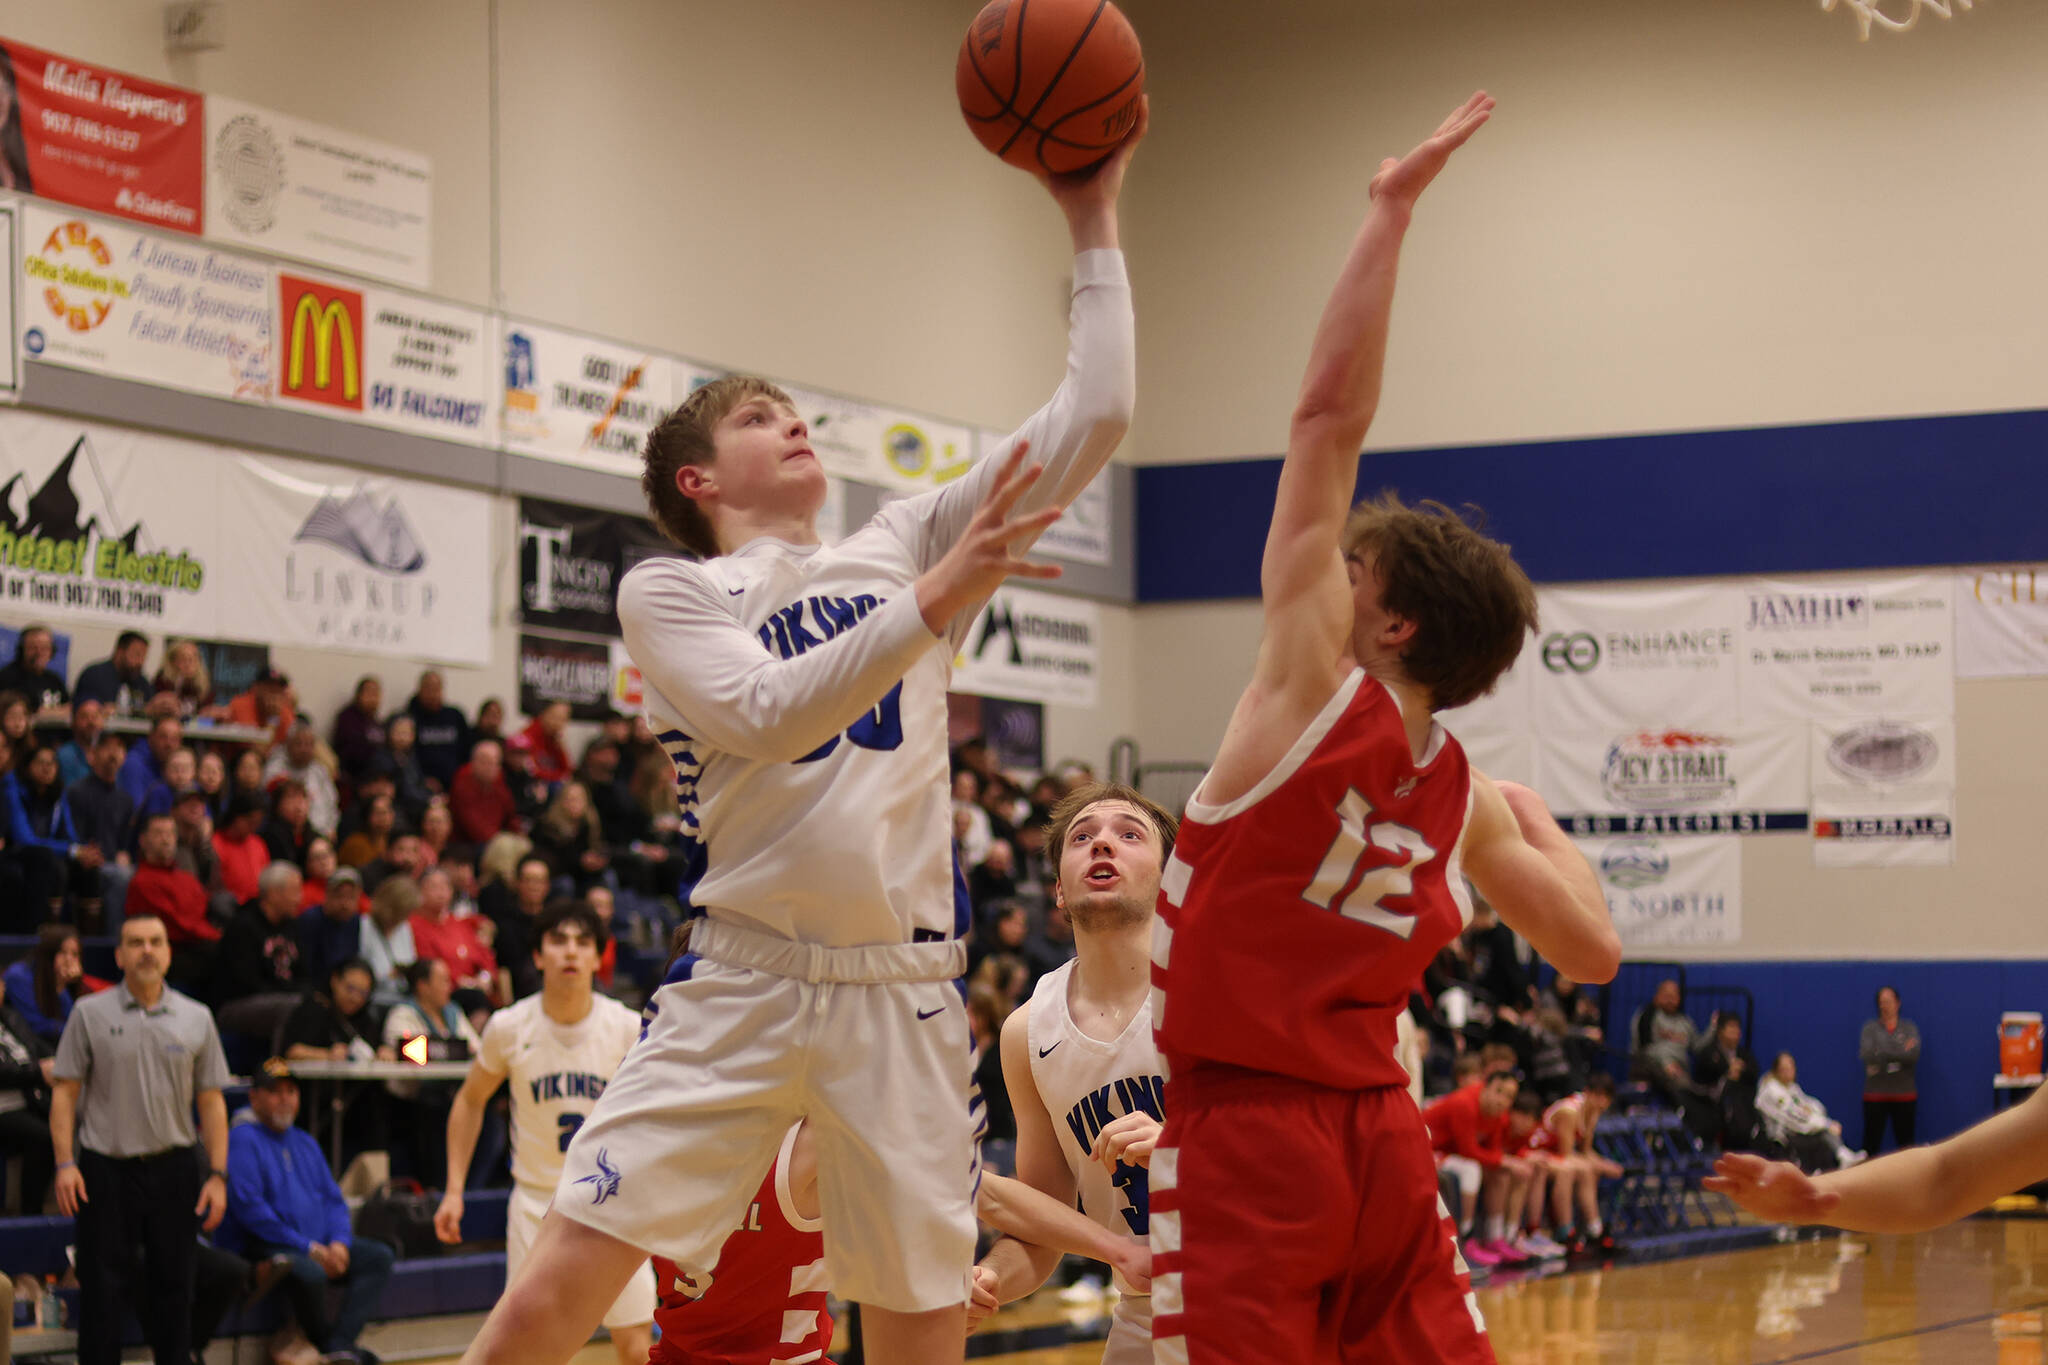 Petersburg junior Hunter Conn puts up a shot over Wrangell senior Ethan Blatchley as part of a play that briefly gave the Vikings a slim lead against the Wolves. However, Wrangell would answer back and go on to secure a berth to state. (Ben Hohenstatt / Juneau Empire)